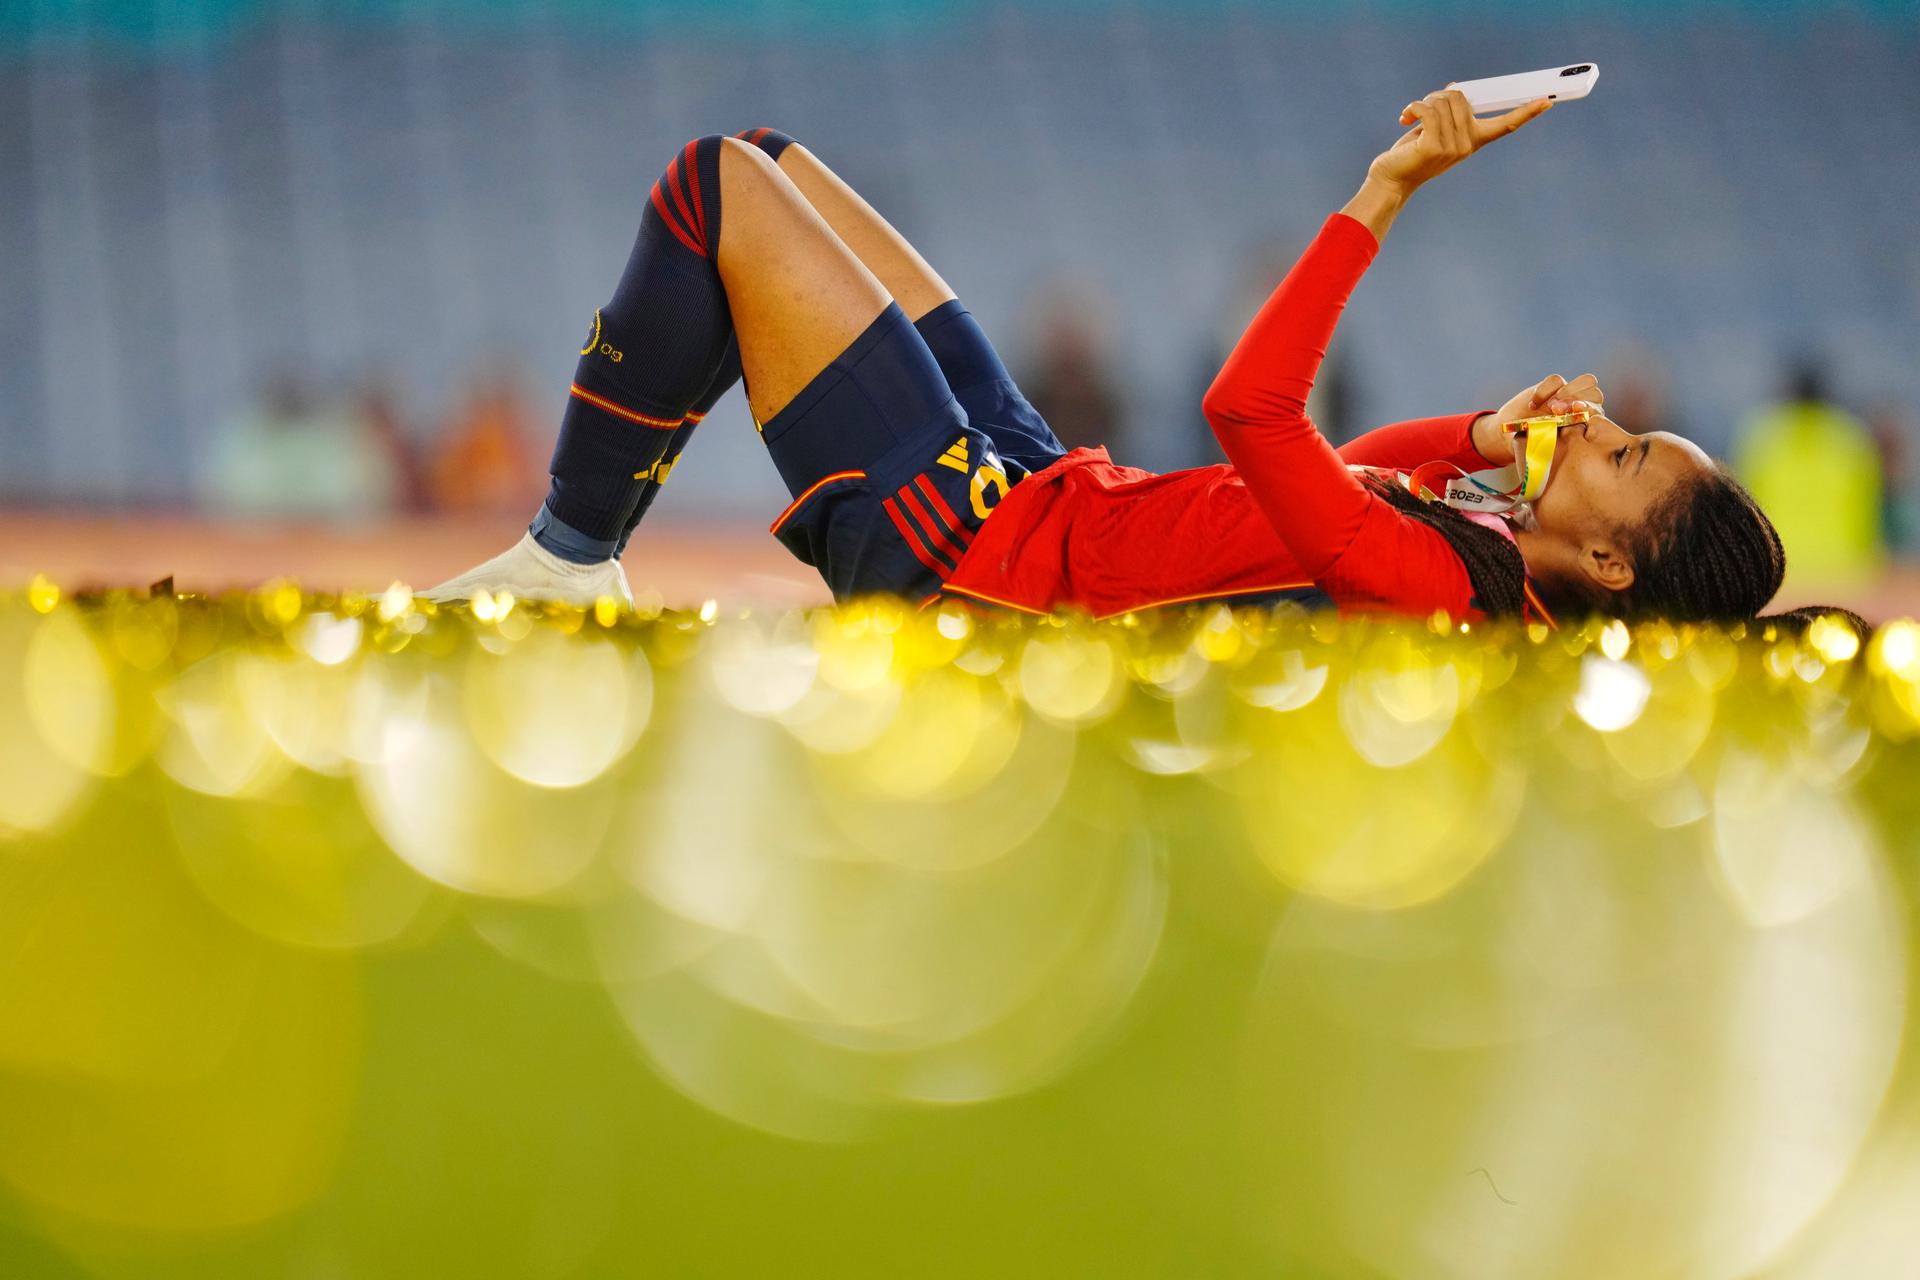 Woman eating in grass in a soccer uniform kissing a medal